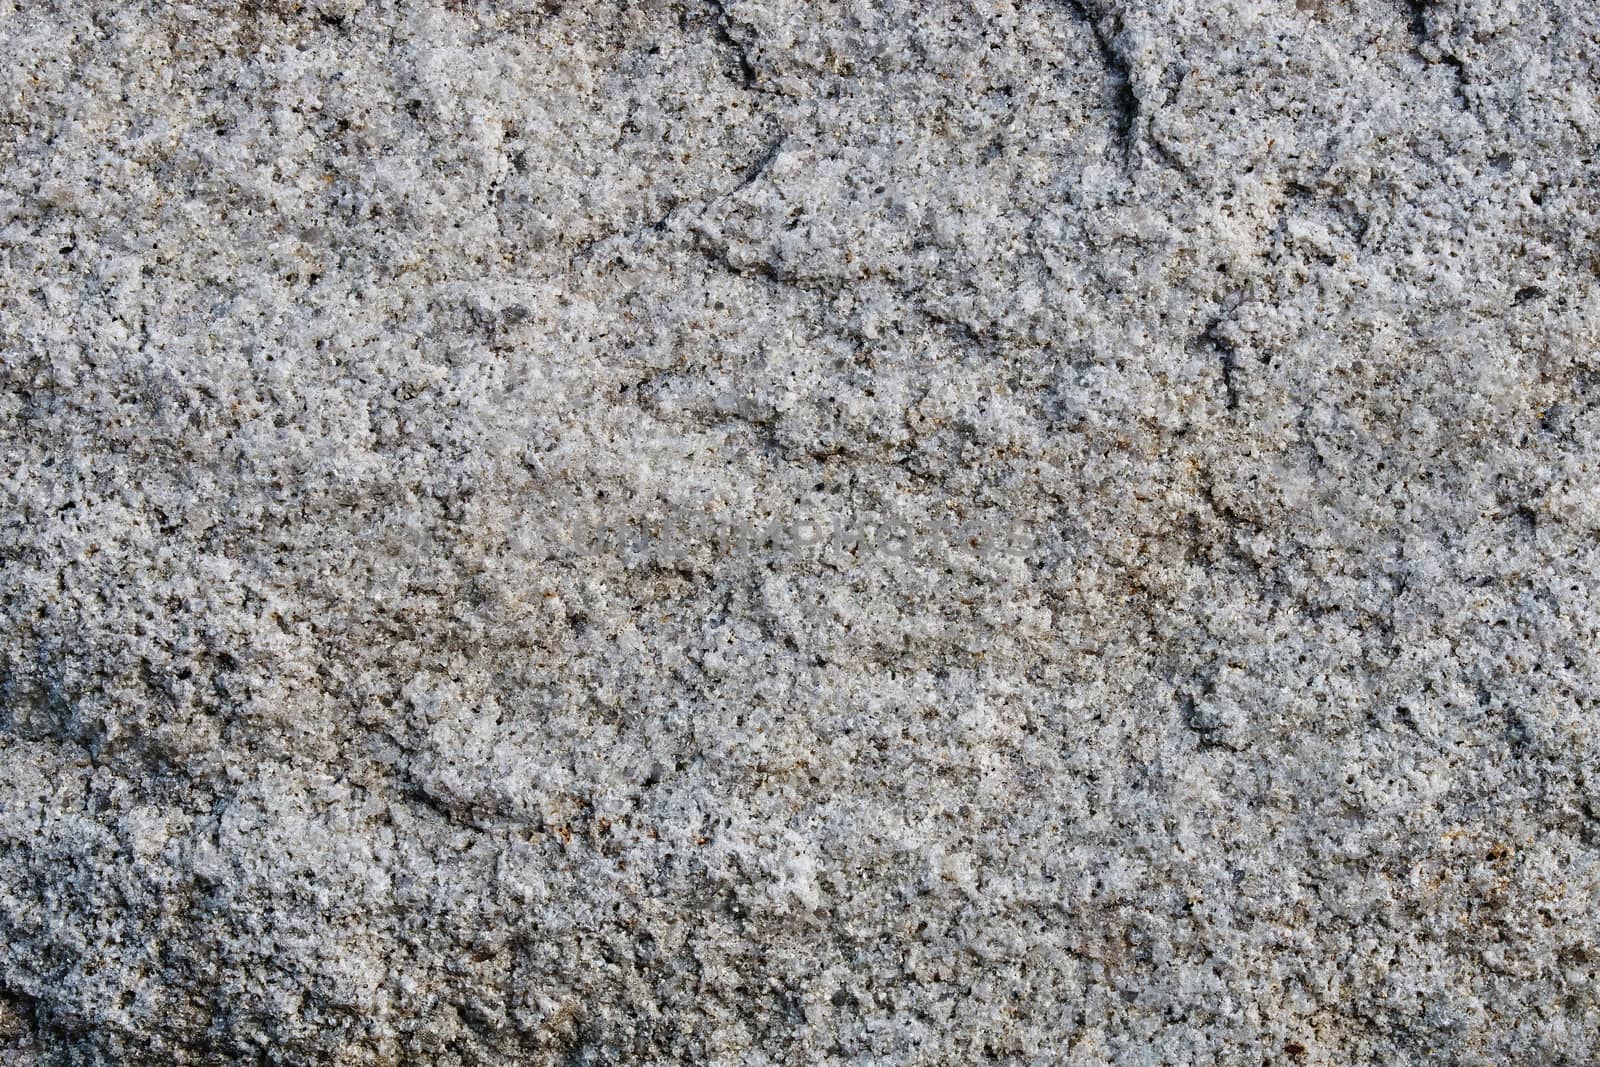 Stone surface close up